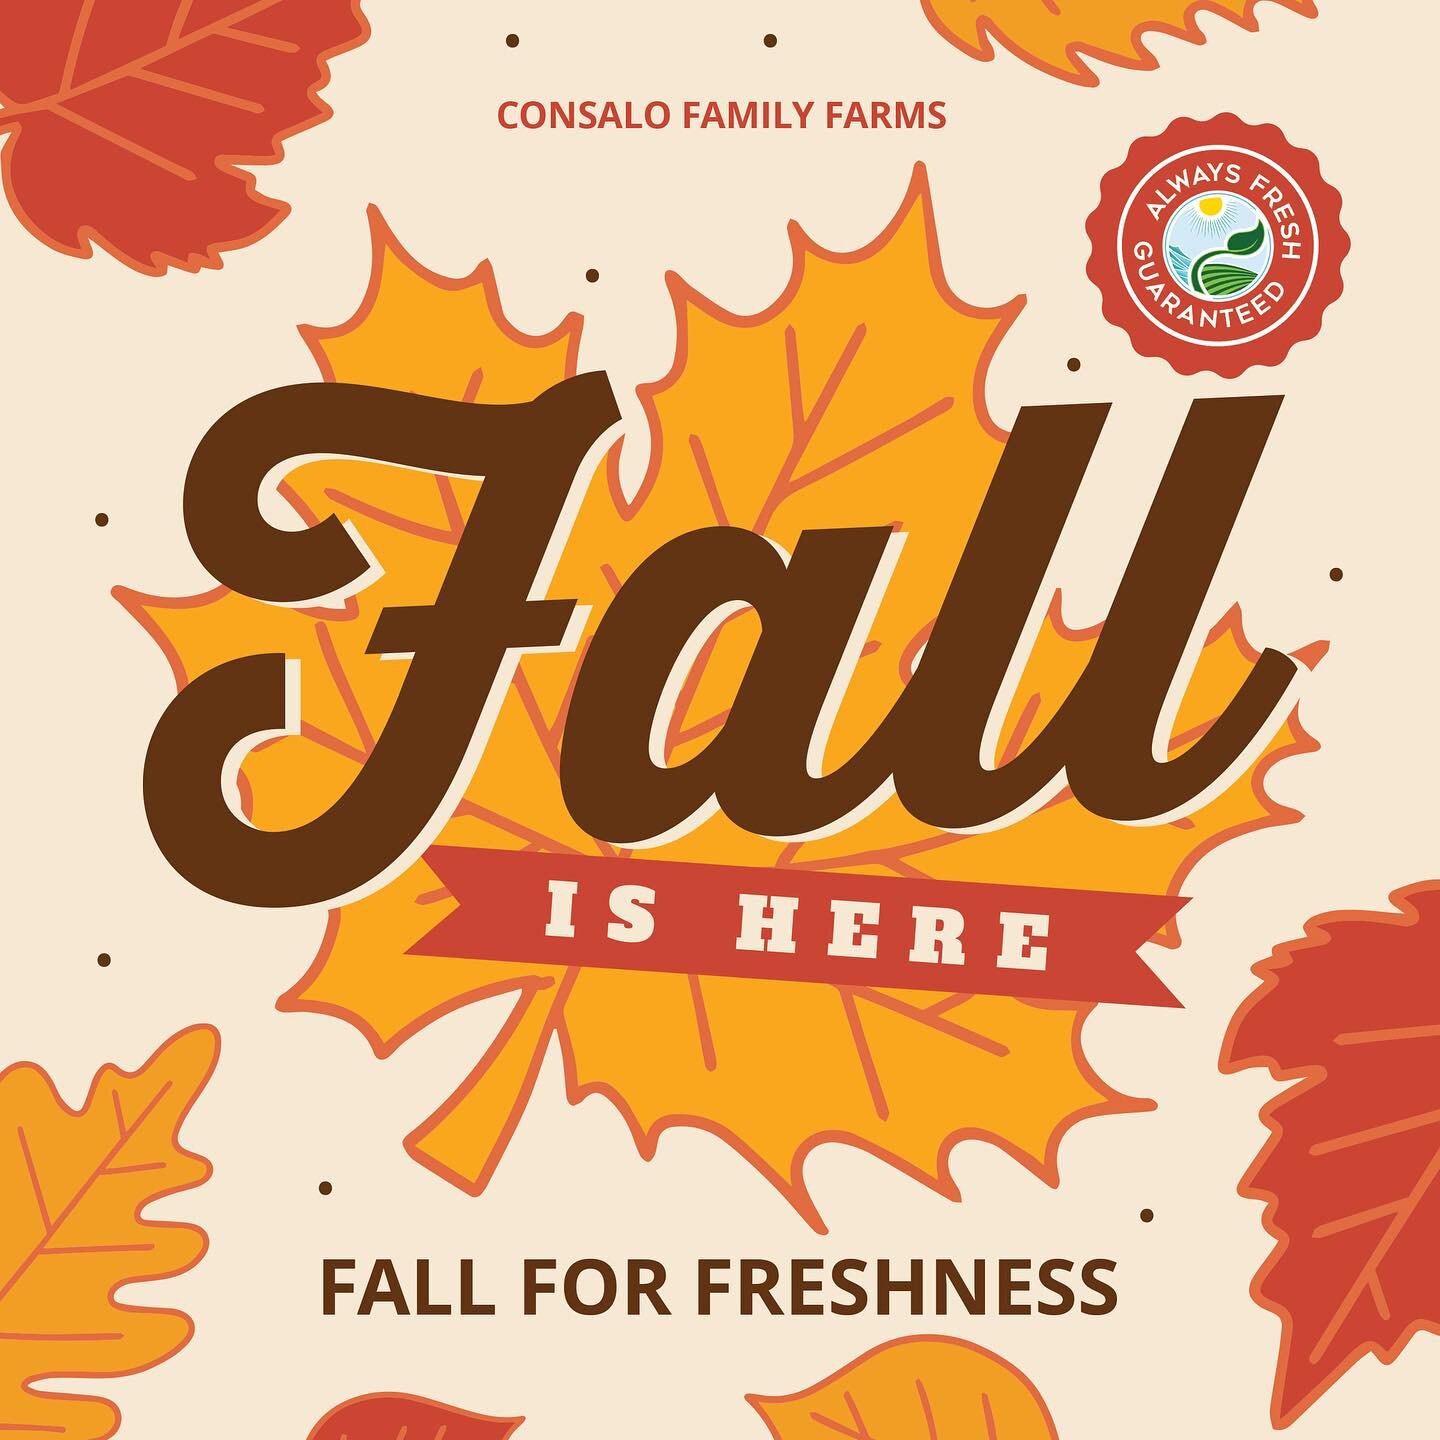 Welcoming the first day of fall at Consalo Family Farms, where we can't help but 'Fall for Freshness' every season!🍂

👨🏻&zwj;🌾 Family owned grower, packer, shipper, importer, &amp; distributor
📍Vineland &bull; Newfield &bull; Hammonton &bull; Eg